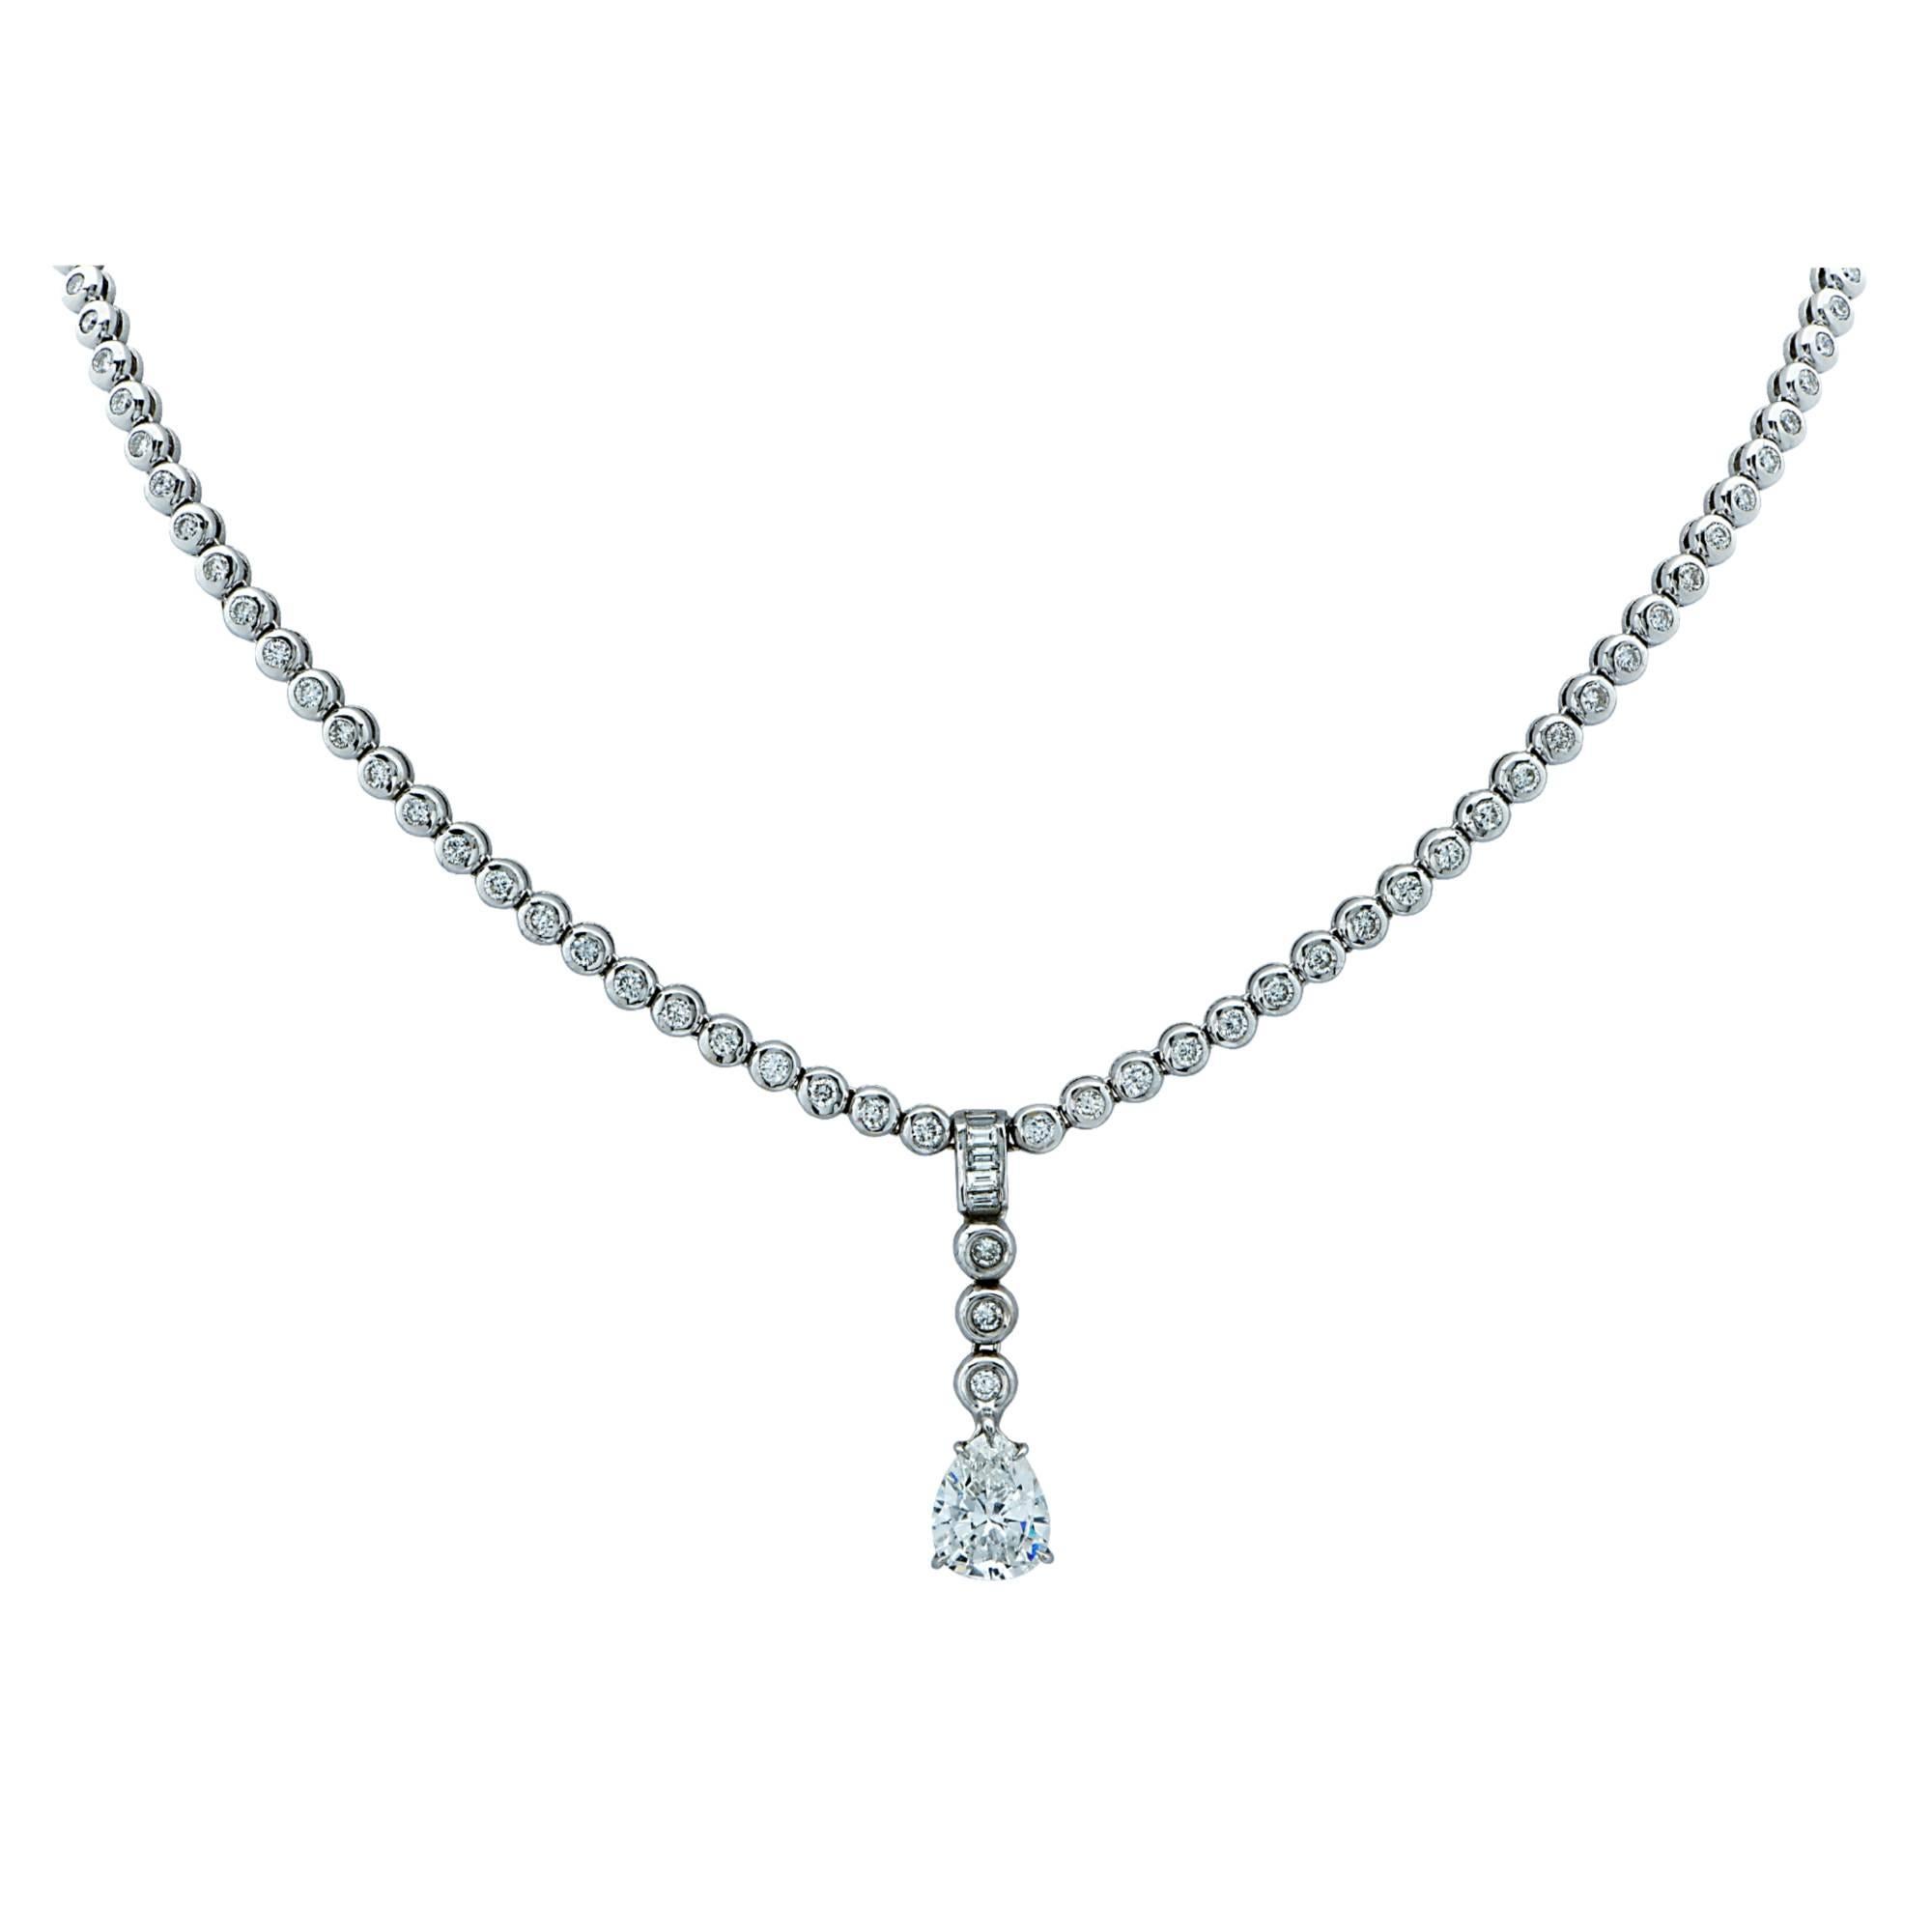 A spectacular 18k white gold diamond necklace featuring a gorgeous pear brilliant cut diamond weighing approximately 2.10cts G color SI clarity gracefully cascading from a stunning diamond necklace featuring 68 round brilliant and baguette cut